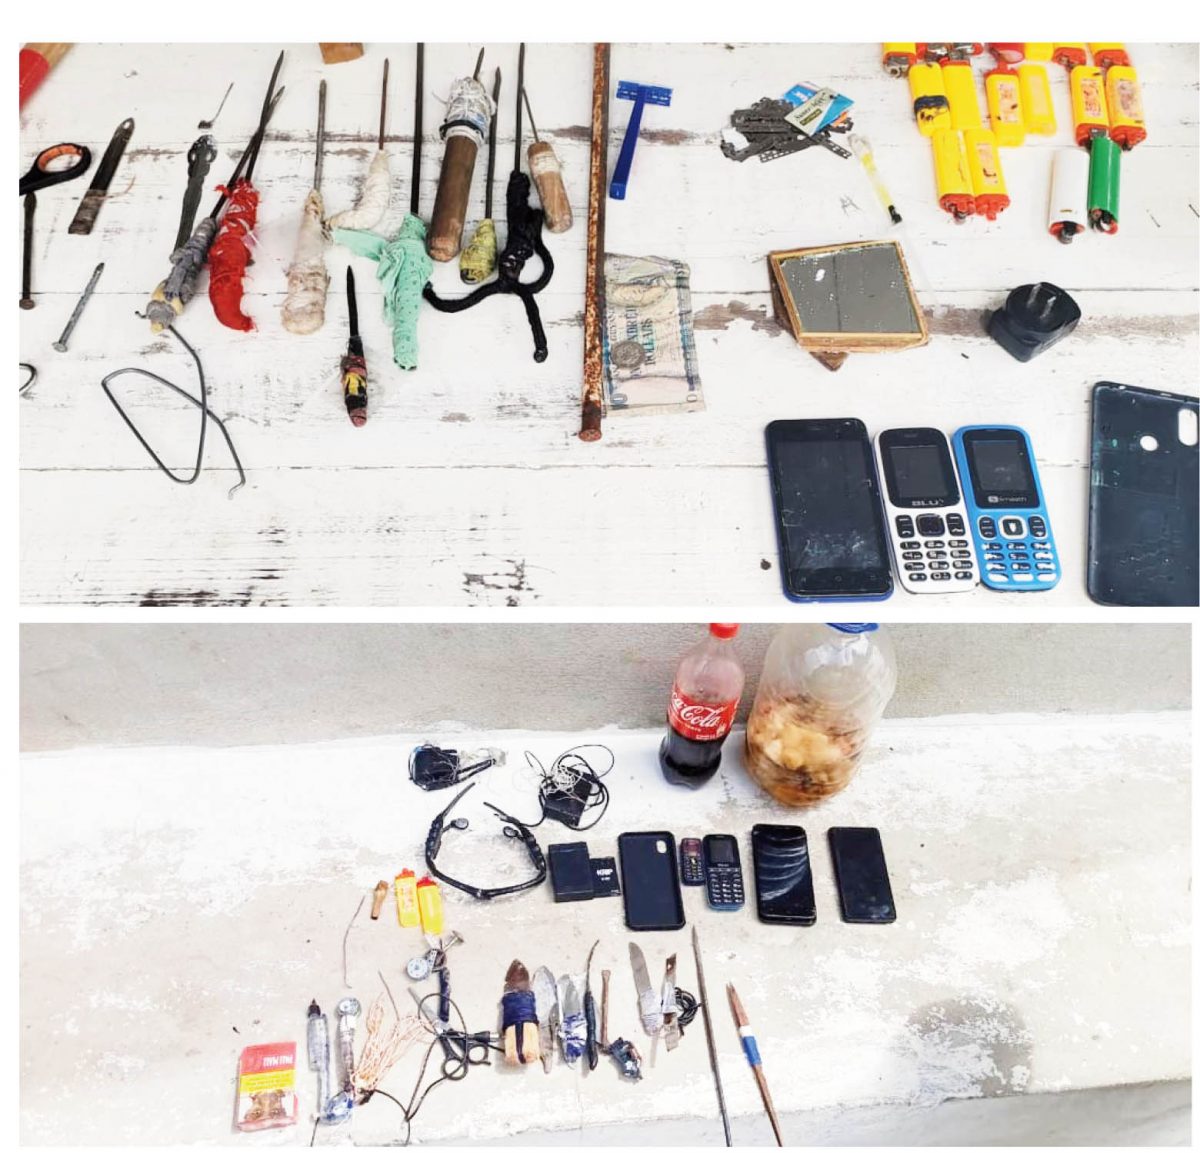 Some of the contraband items discovered during Operation ‘Sanitize’ (Police photos)